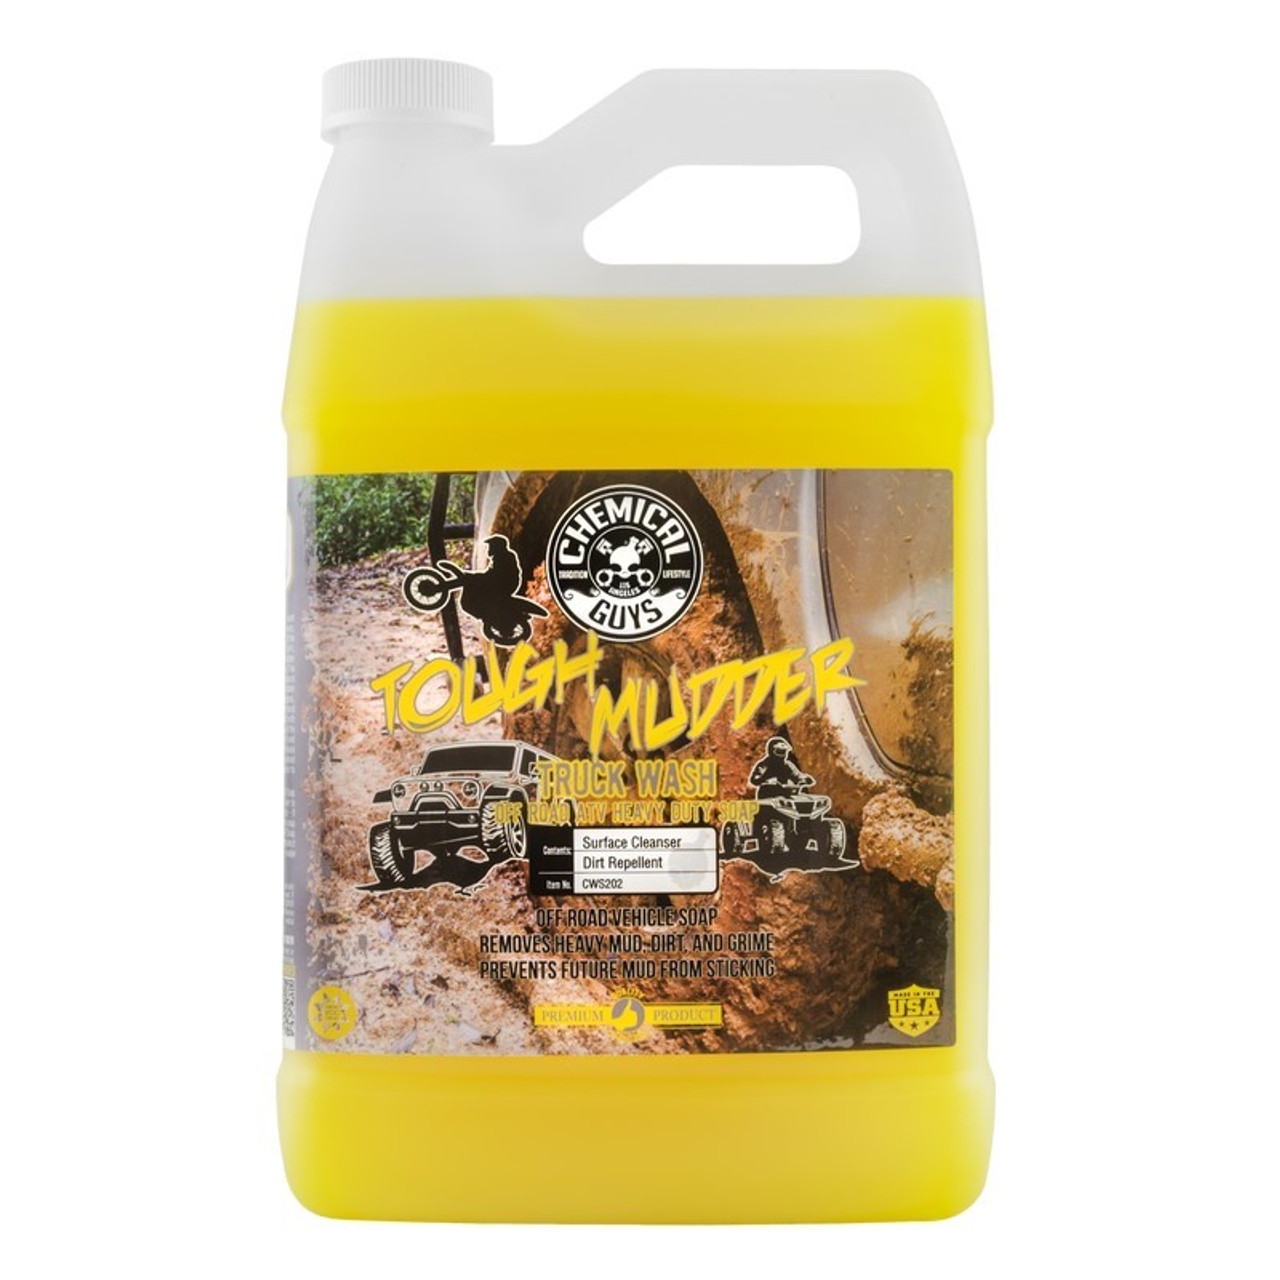 Chemical Guys Swift Wipe Waterless Car Wash 1 Gallon for sale